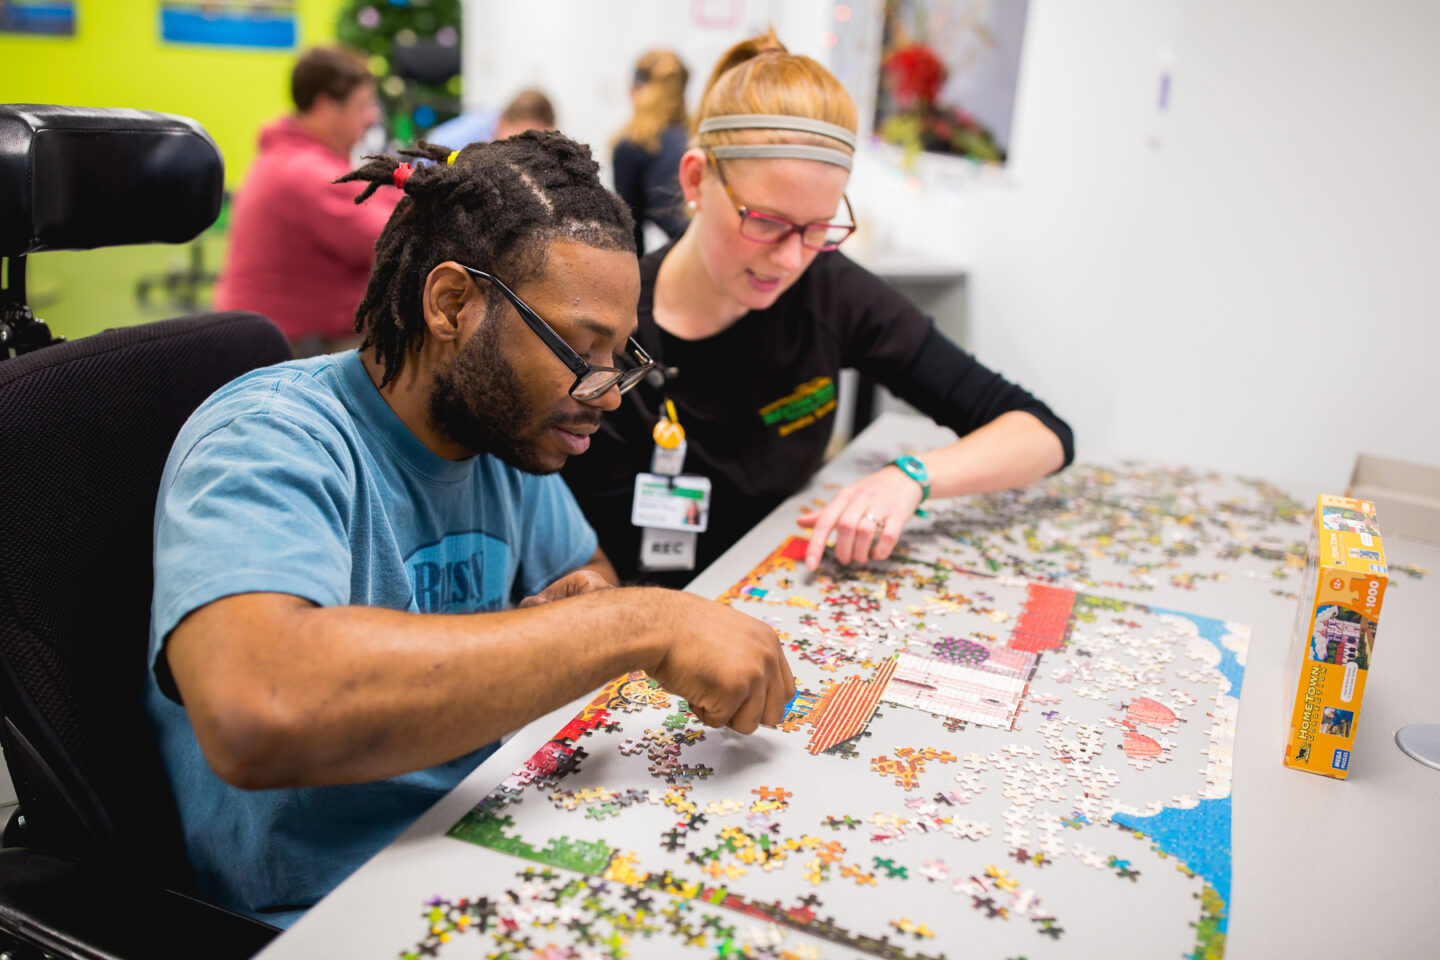 An adult man works on a large puzzle with a recreational therapist, focusing on cognitive and social skills during a therapy session.